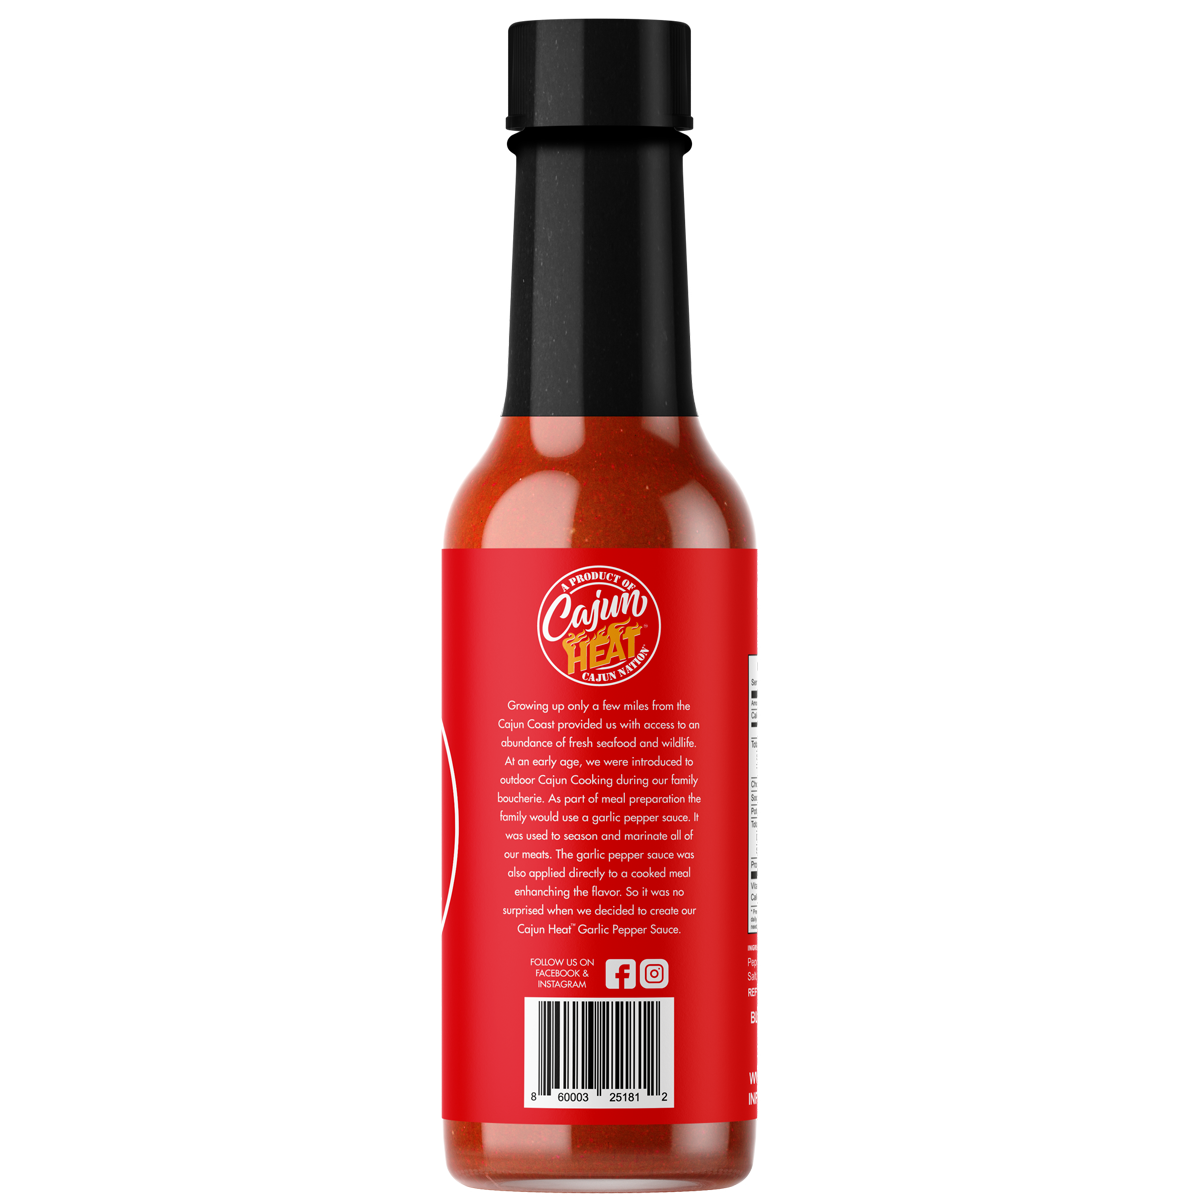  Cajun Heat Garlic Pepper Sauce is a Certified Cajun LOW SODIUM 5 oz flavorful blend of Cajun Red Peppers and Garlic Juice with No MSG blended for the Home Chef. It contains 100mg of sodium.